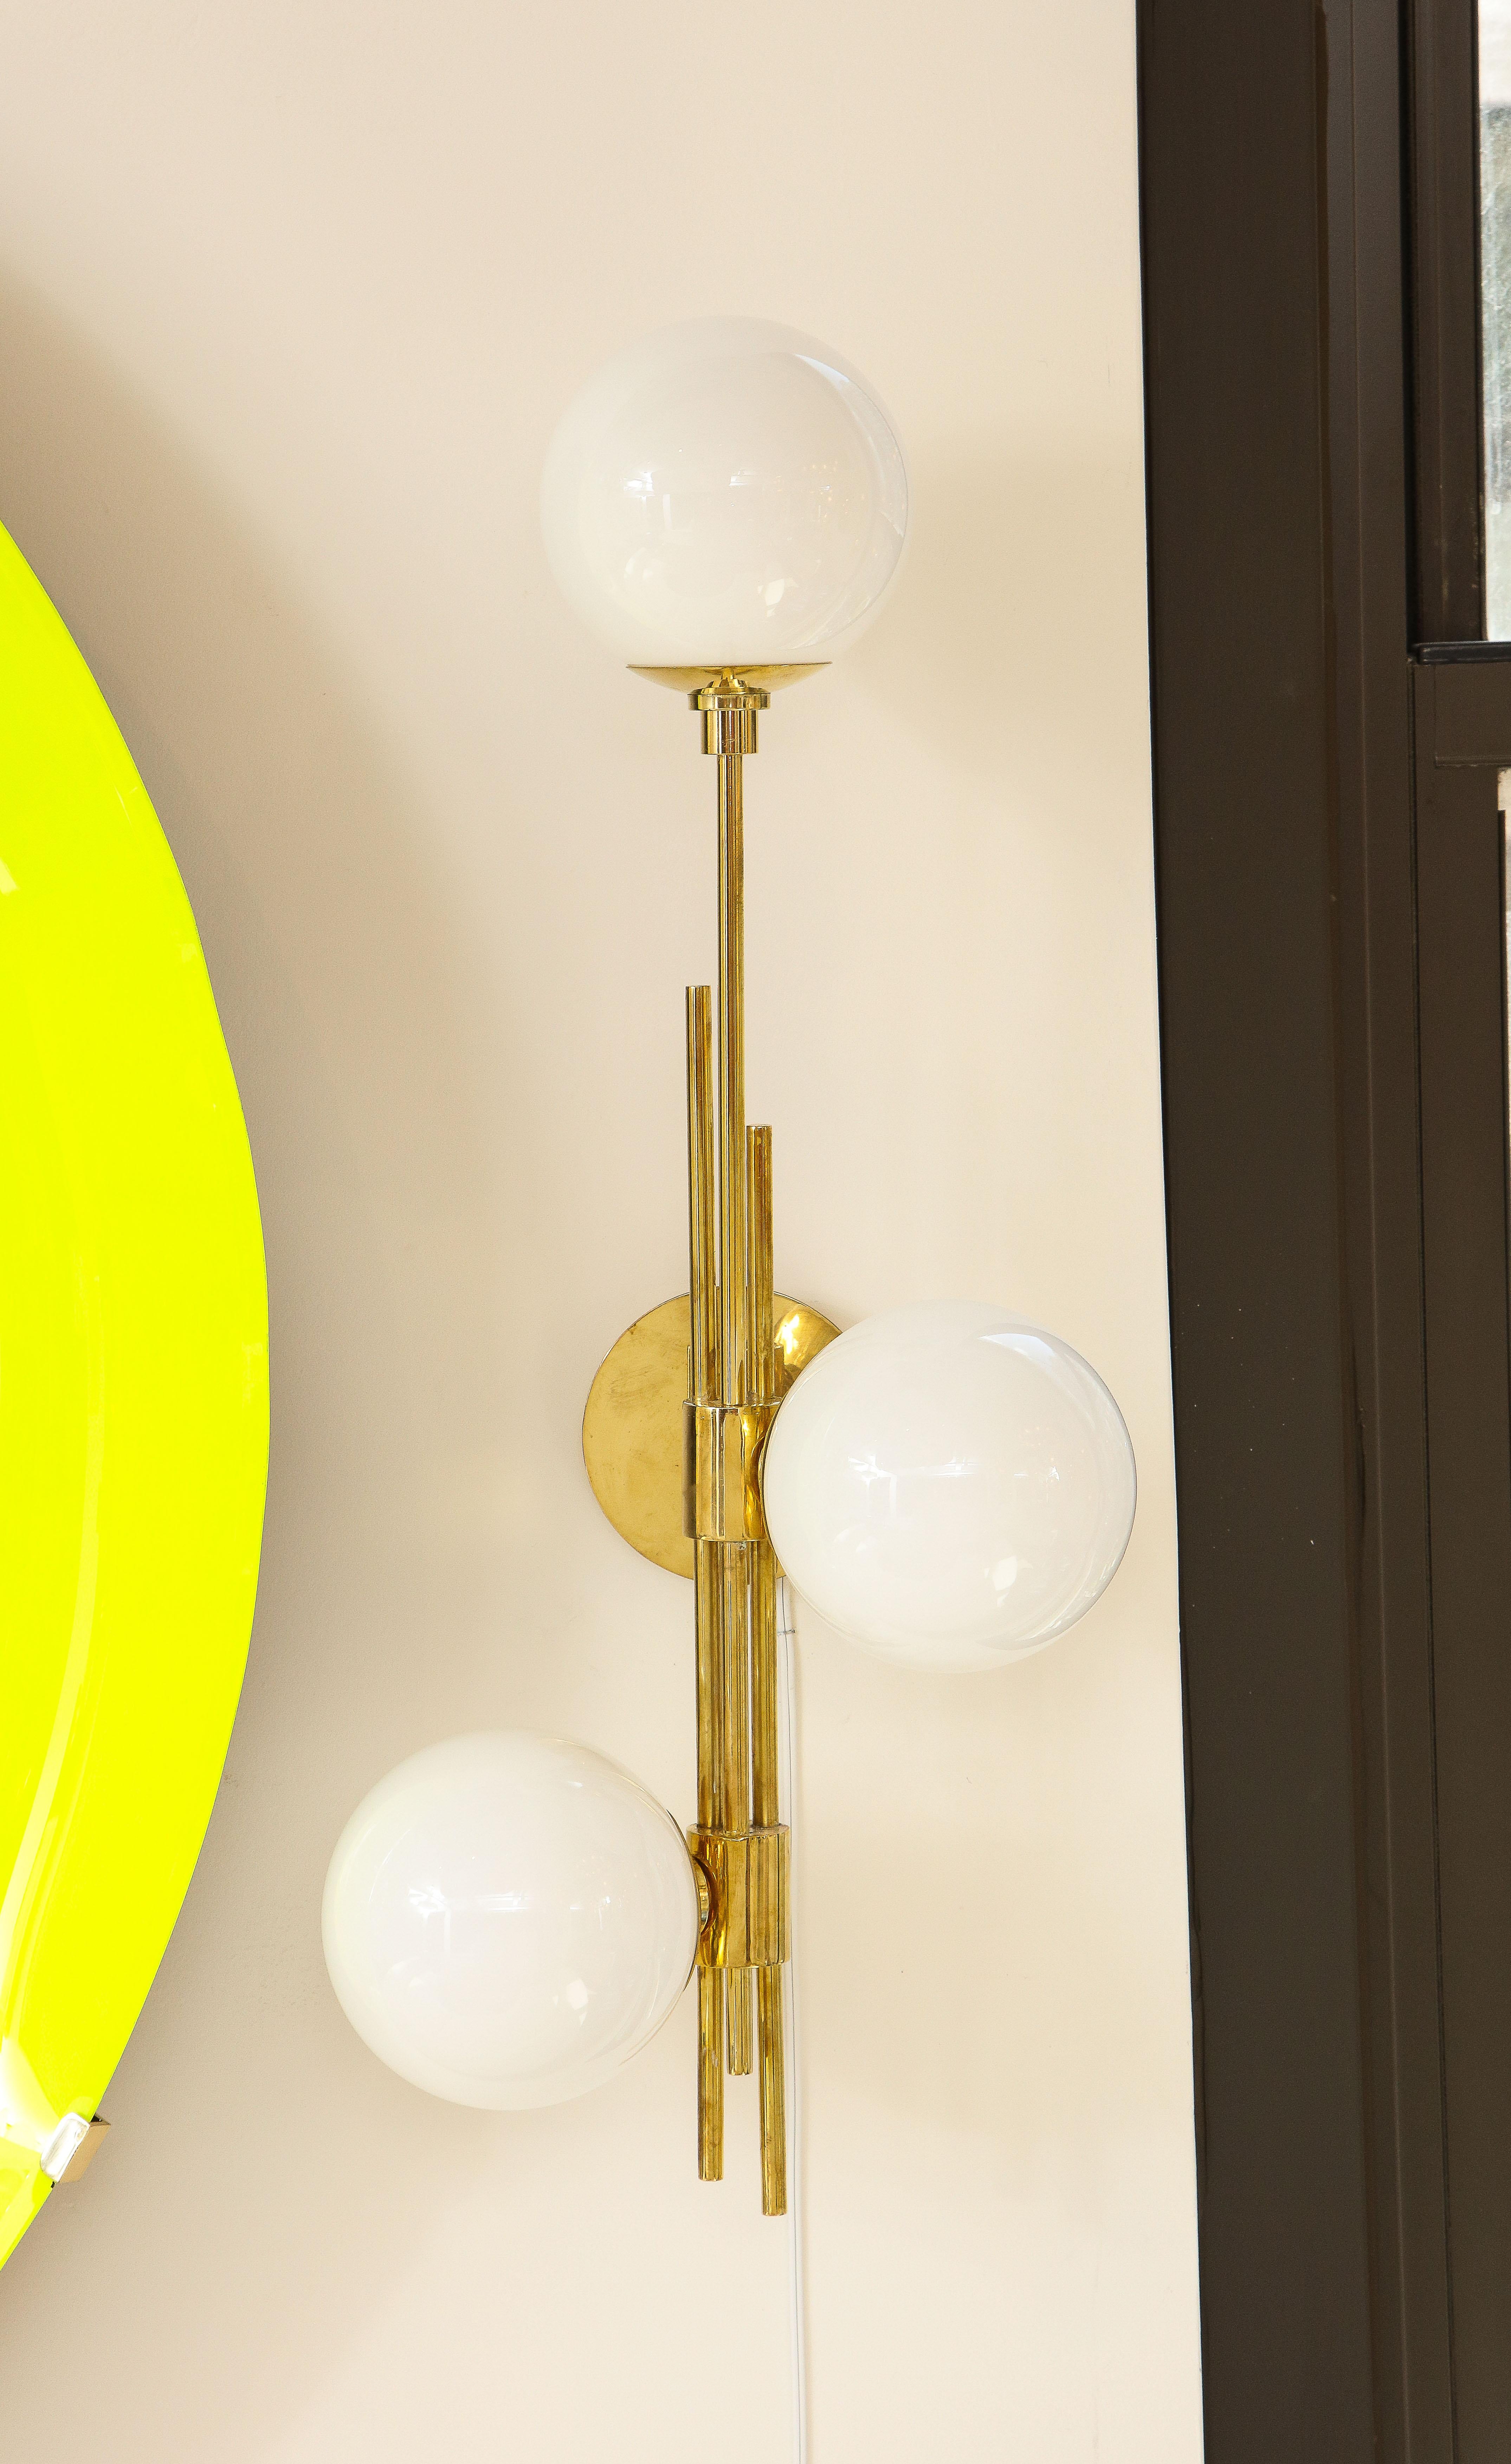 Tall Pair of Translucent White Murano Glass Globes and Brass Sconces, Italy 2022 For Sale 2